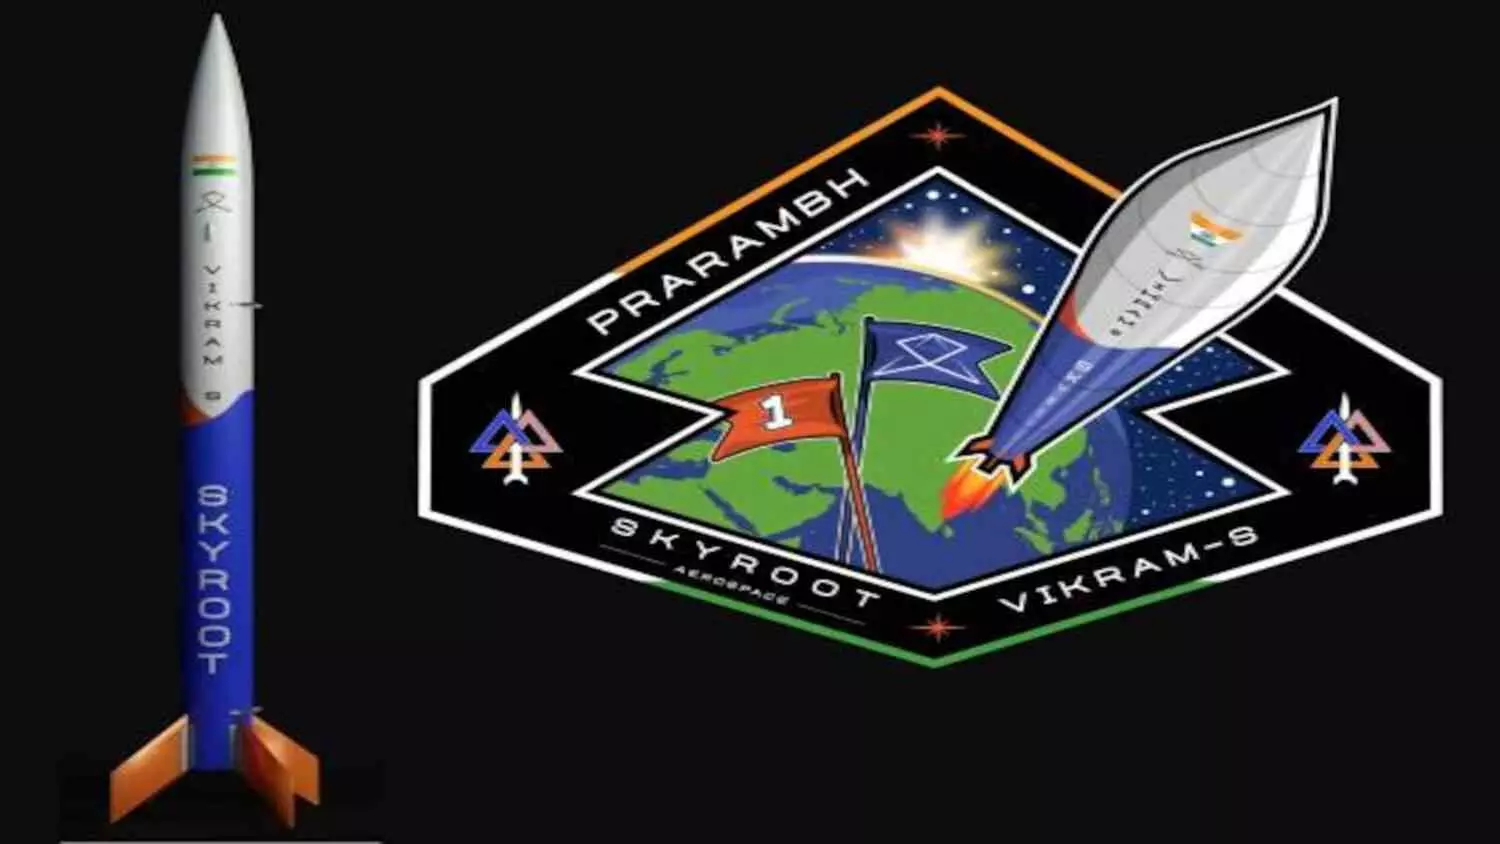 know about mission prarambh skyroot aerospace to launch india first privately developed rocket